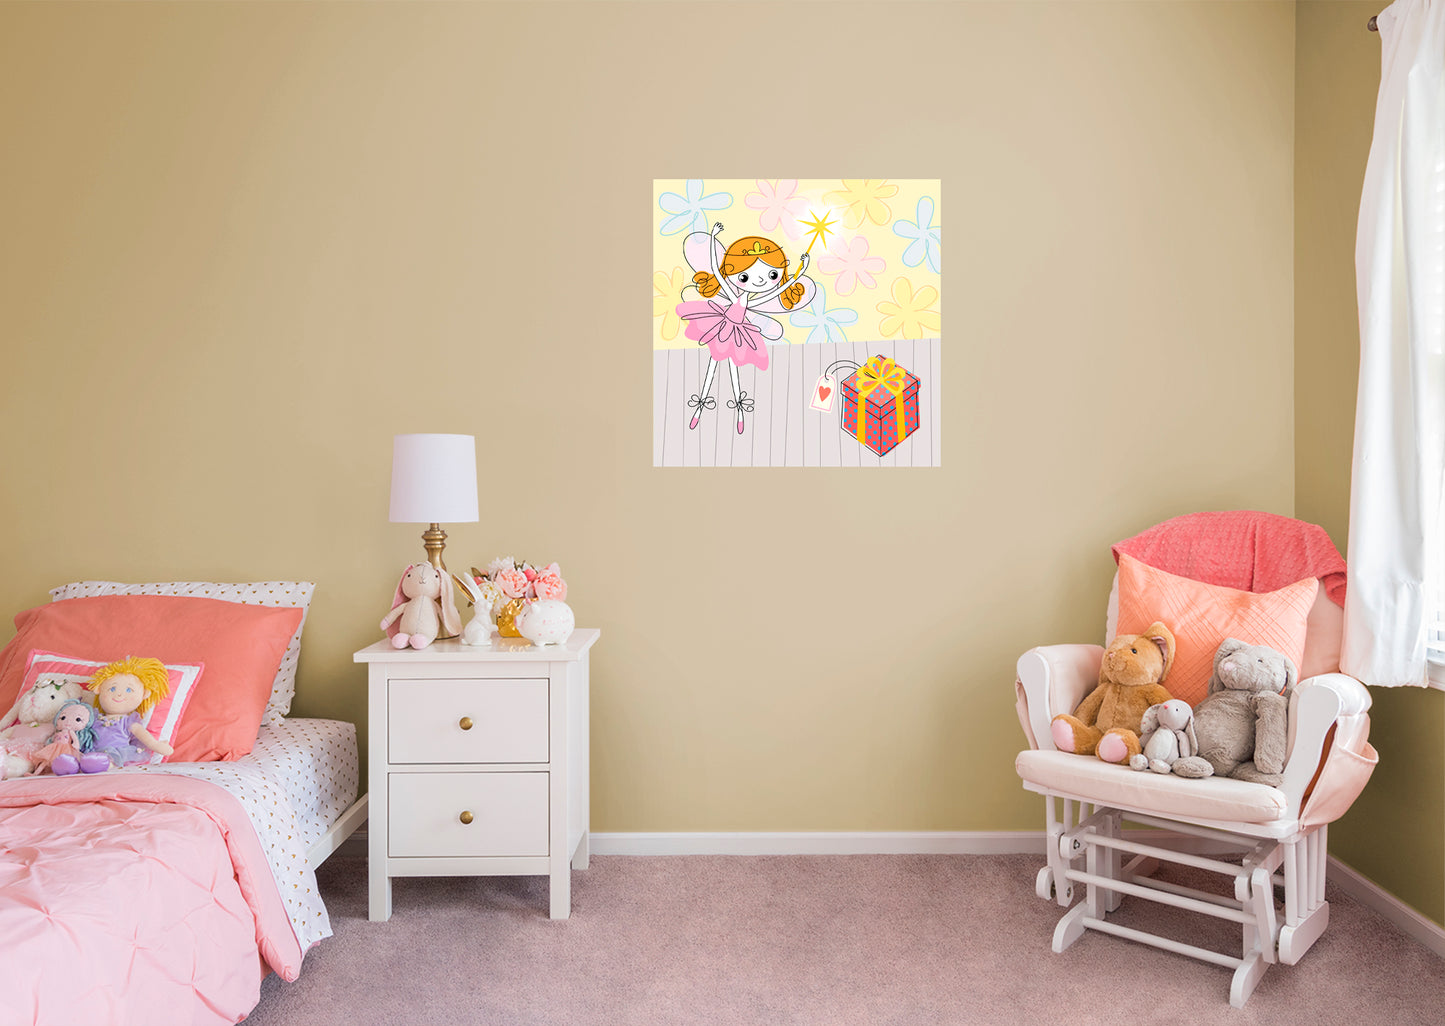 Nursery:  Present Mural        -   Removable Wall   Adhesive Decal